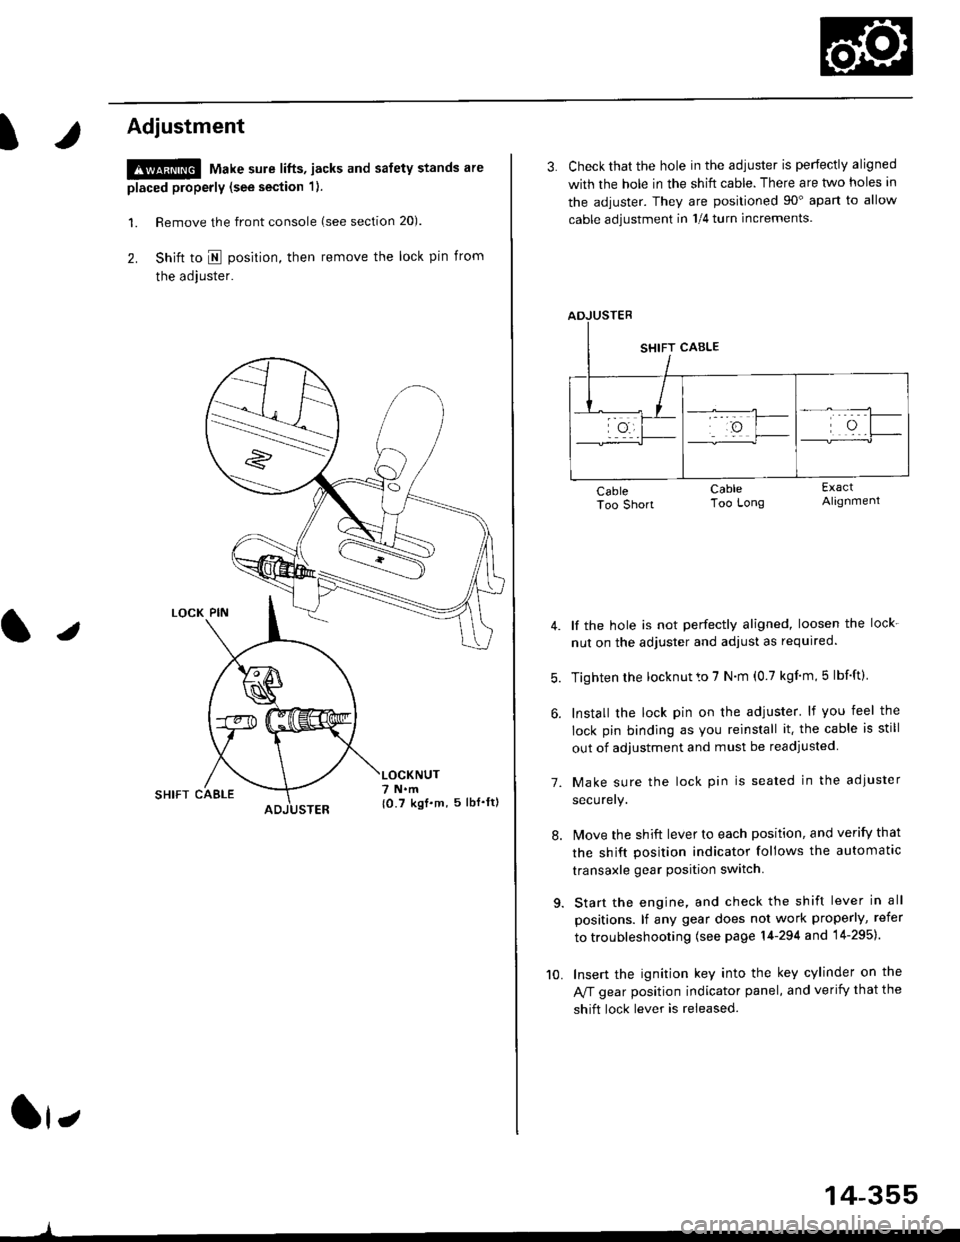 HONDA CIVIC 1998 6.G Workshop Manual t
Adjustment
!@ Make sure lifts, jacks and safety stands are
placed properly (see section 1).
l. Remove the front console (see section 20).
2. Shift to I posirion, then remove the lock pin from
the ad